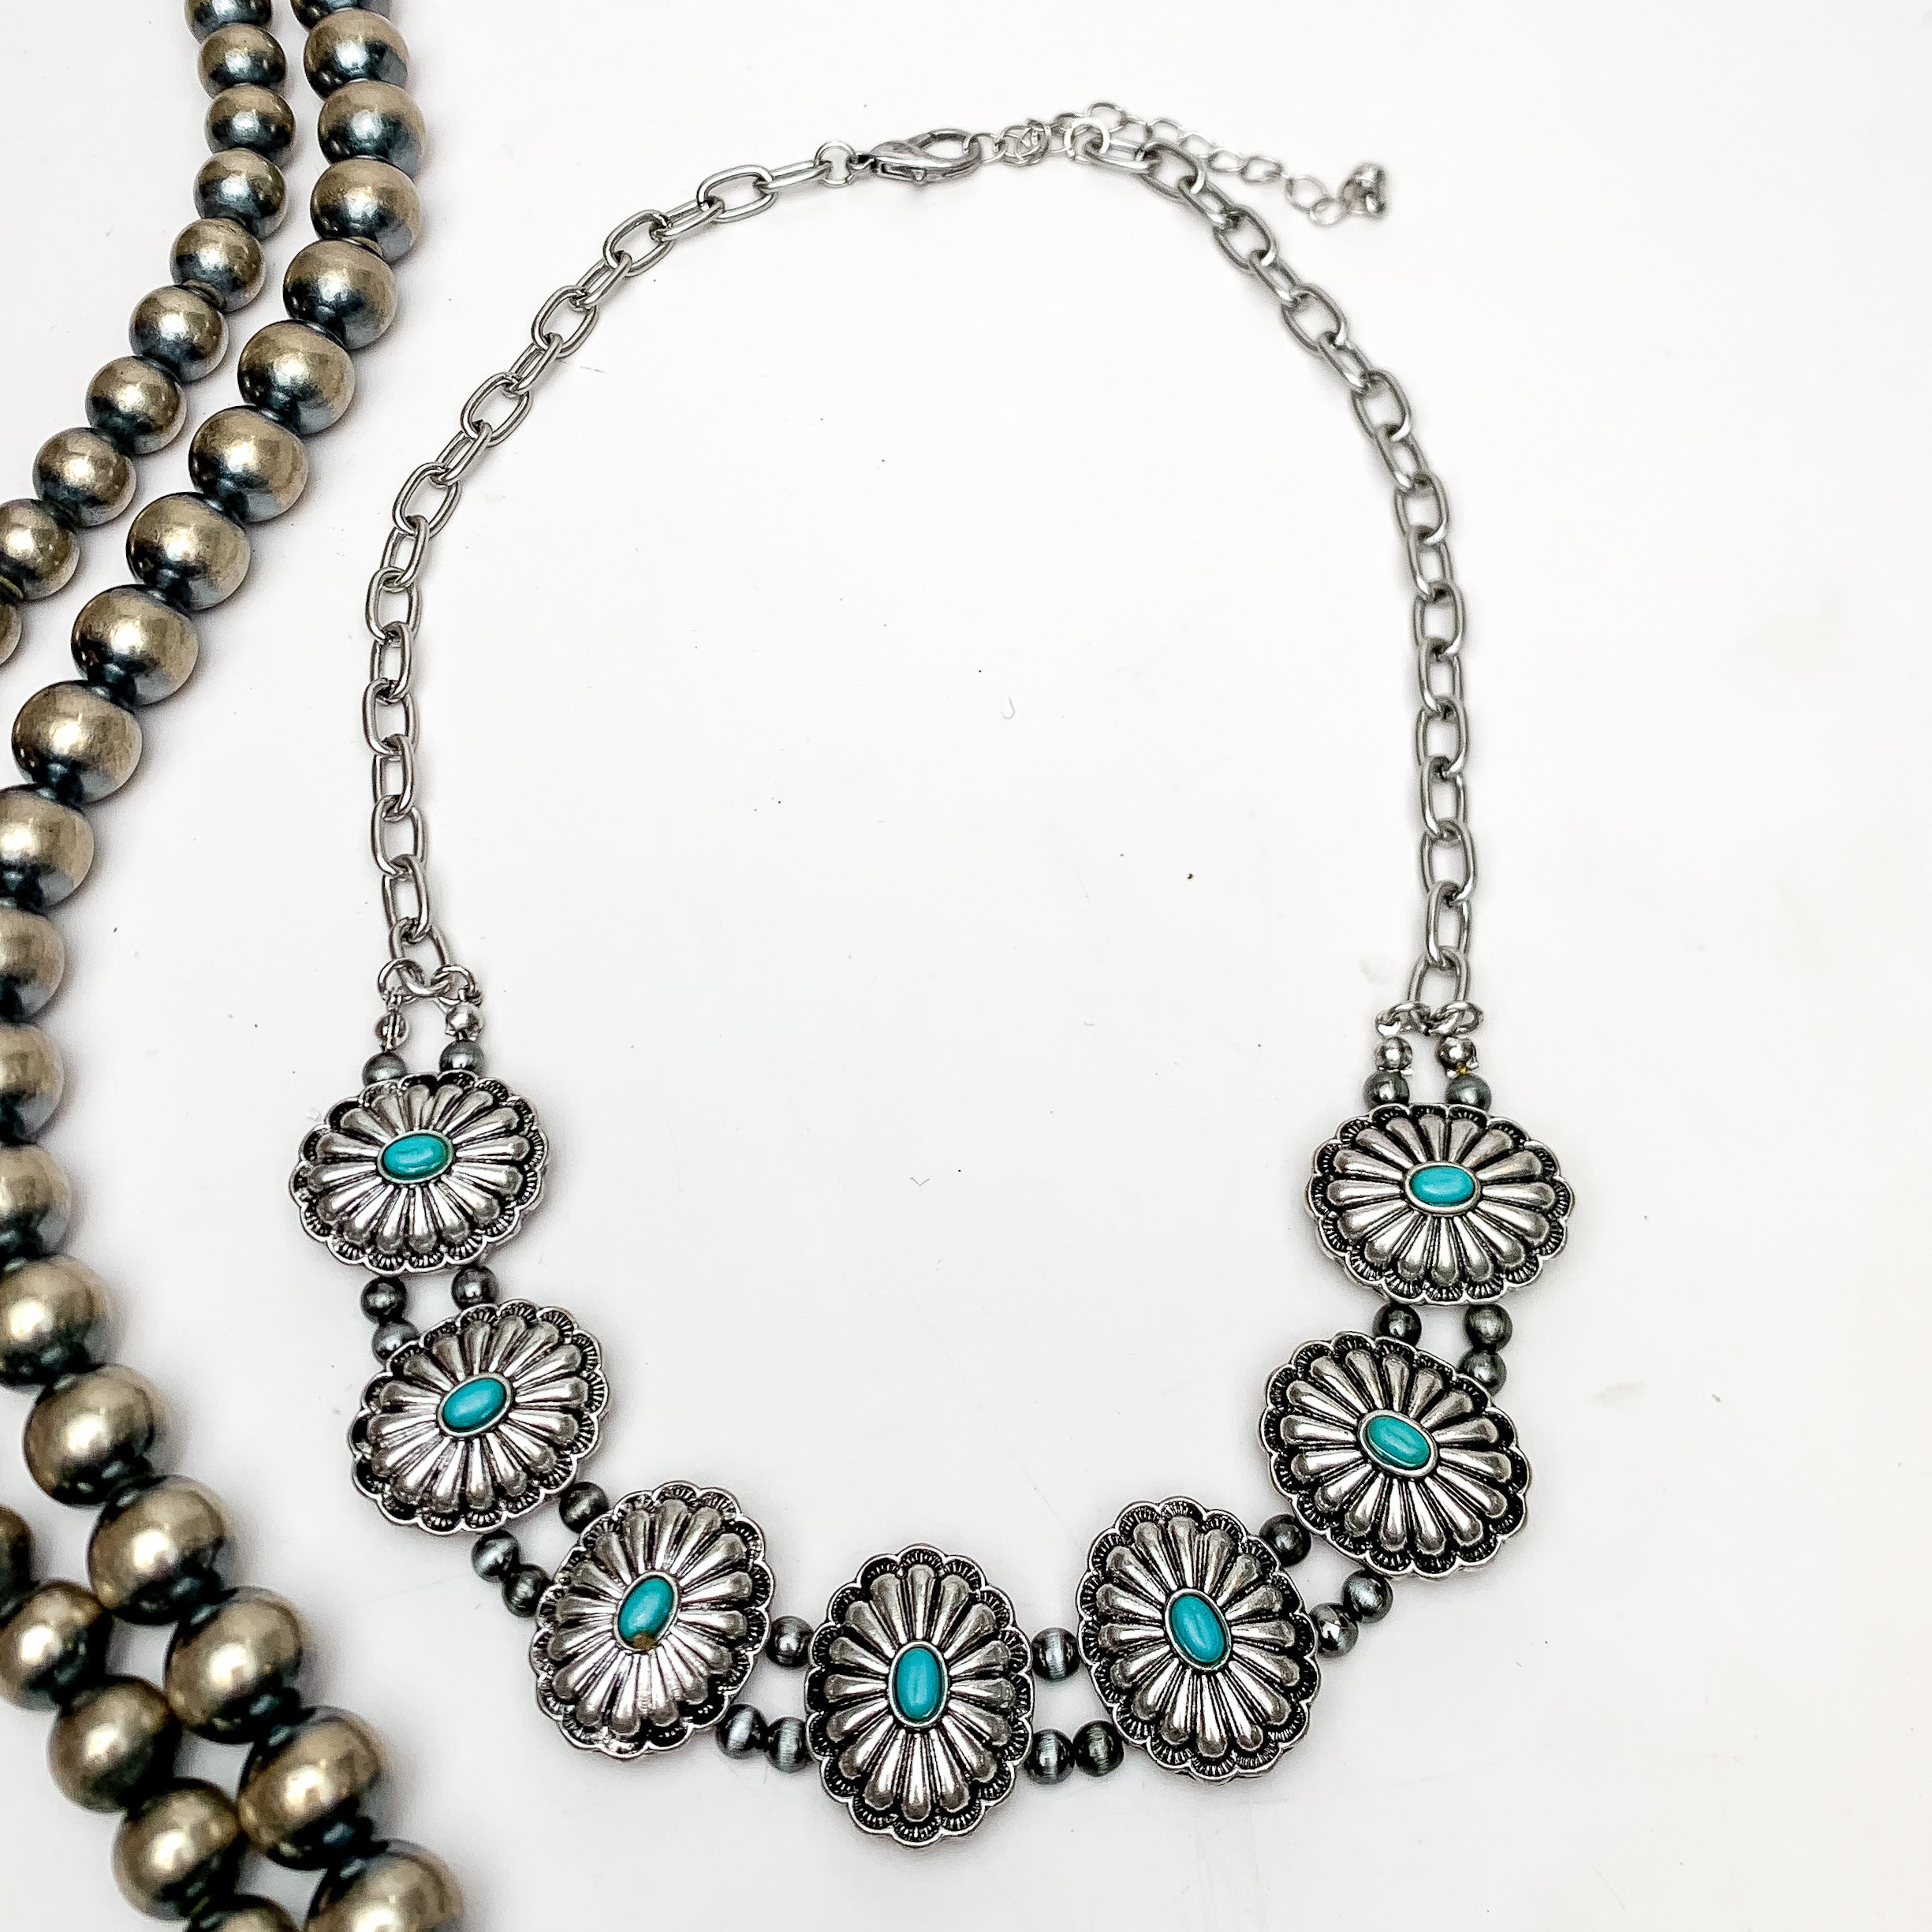 Silver Tone Flower Concho Necklace With Turquoise Blue Stones. This necklace is on a white background with Navajo pearls on the left.